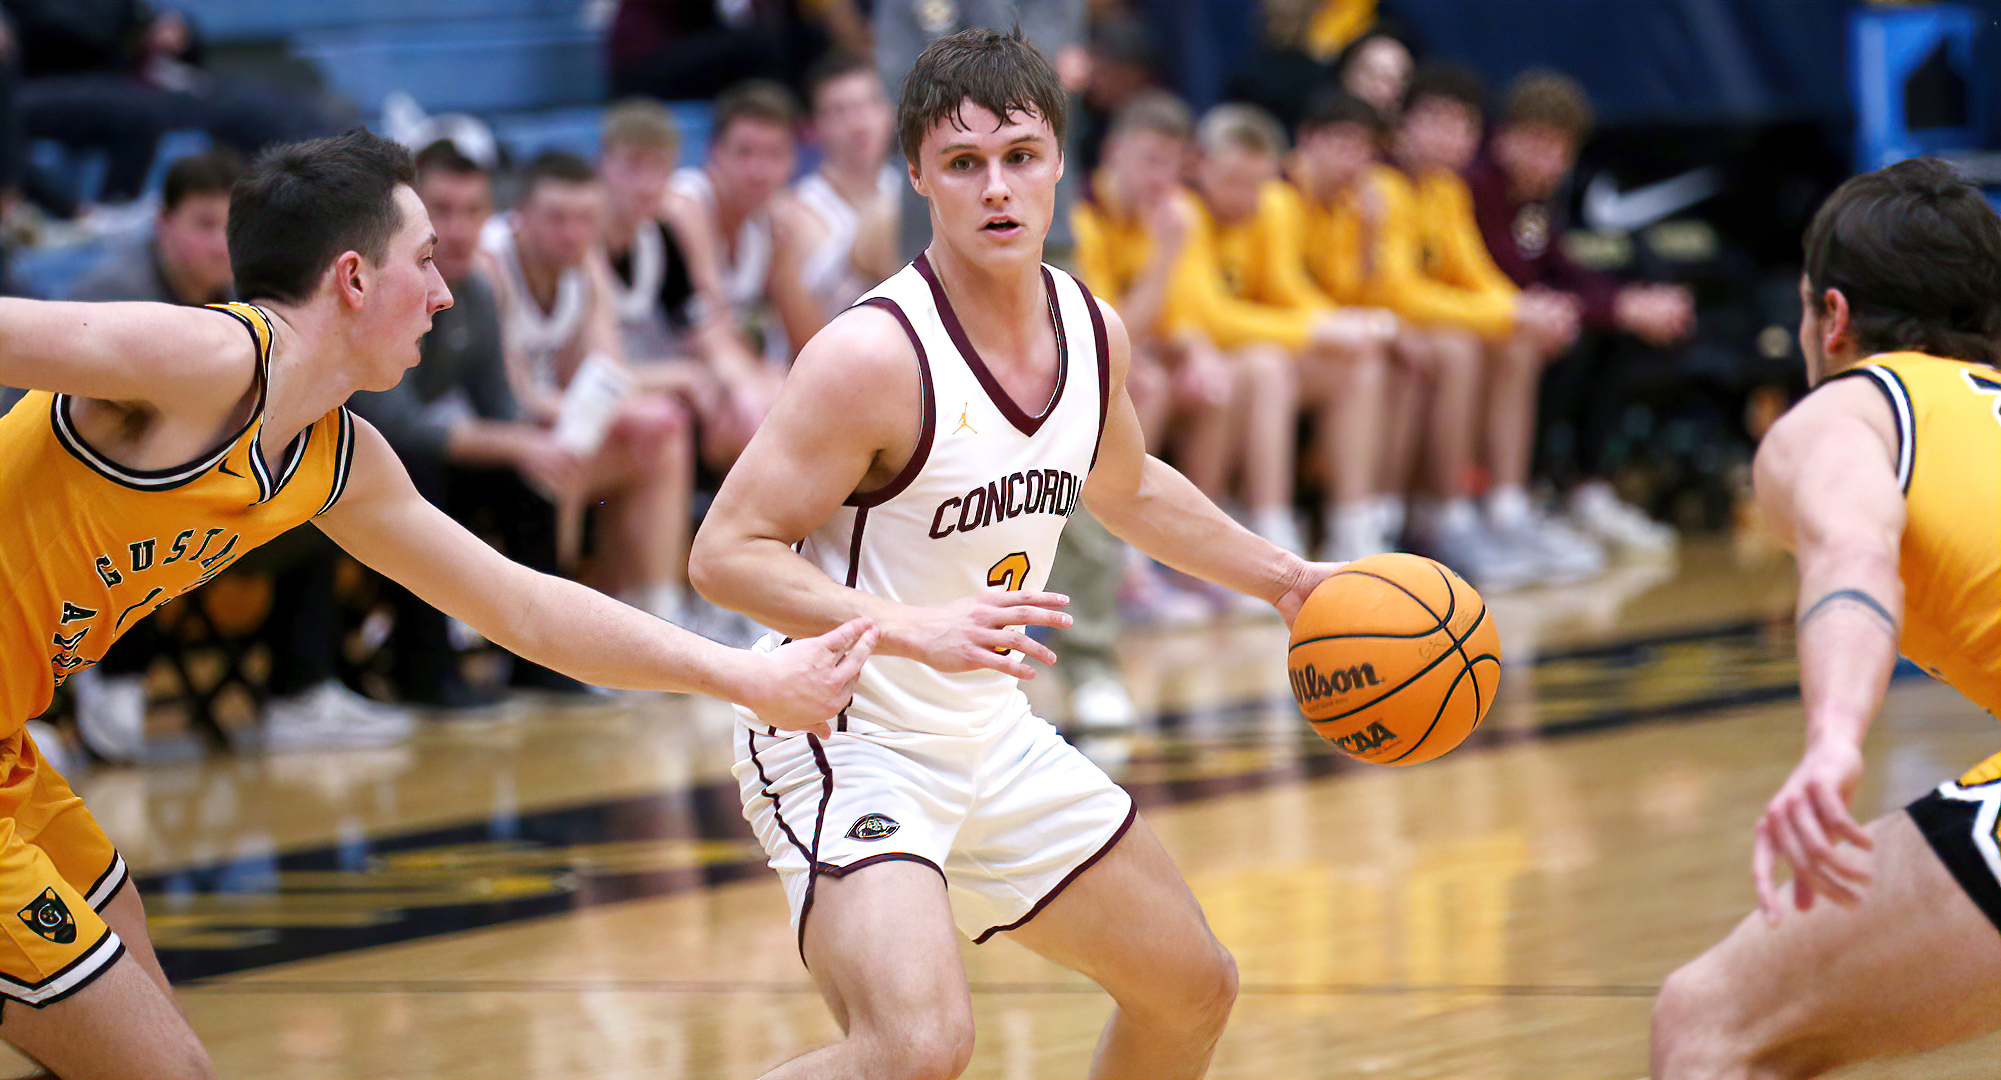 Jackson Jangula looks to dribble between two defenders in the Cobbers' game at Gustavus. (Photo courtesy of Ryan Coleman, D3photography.com)